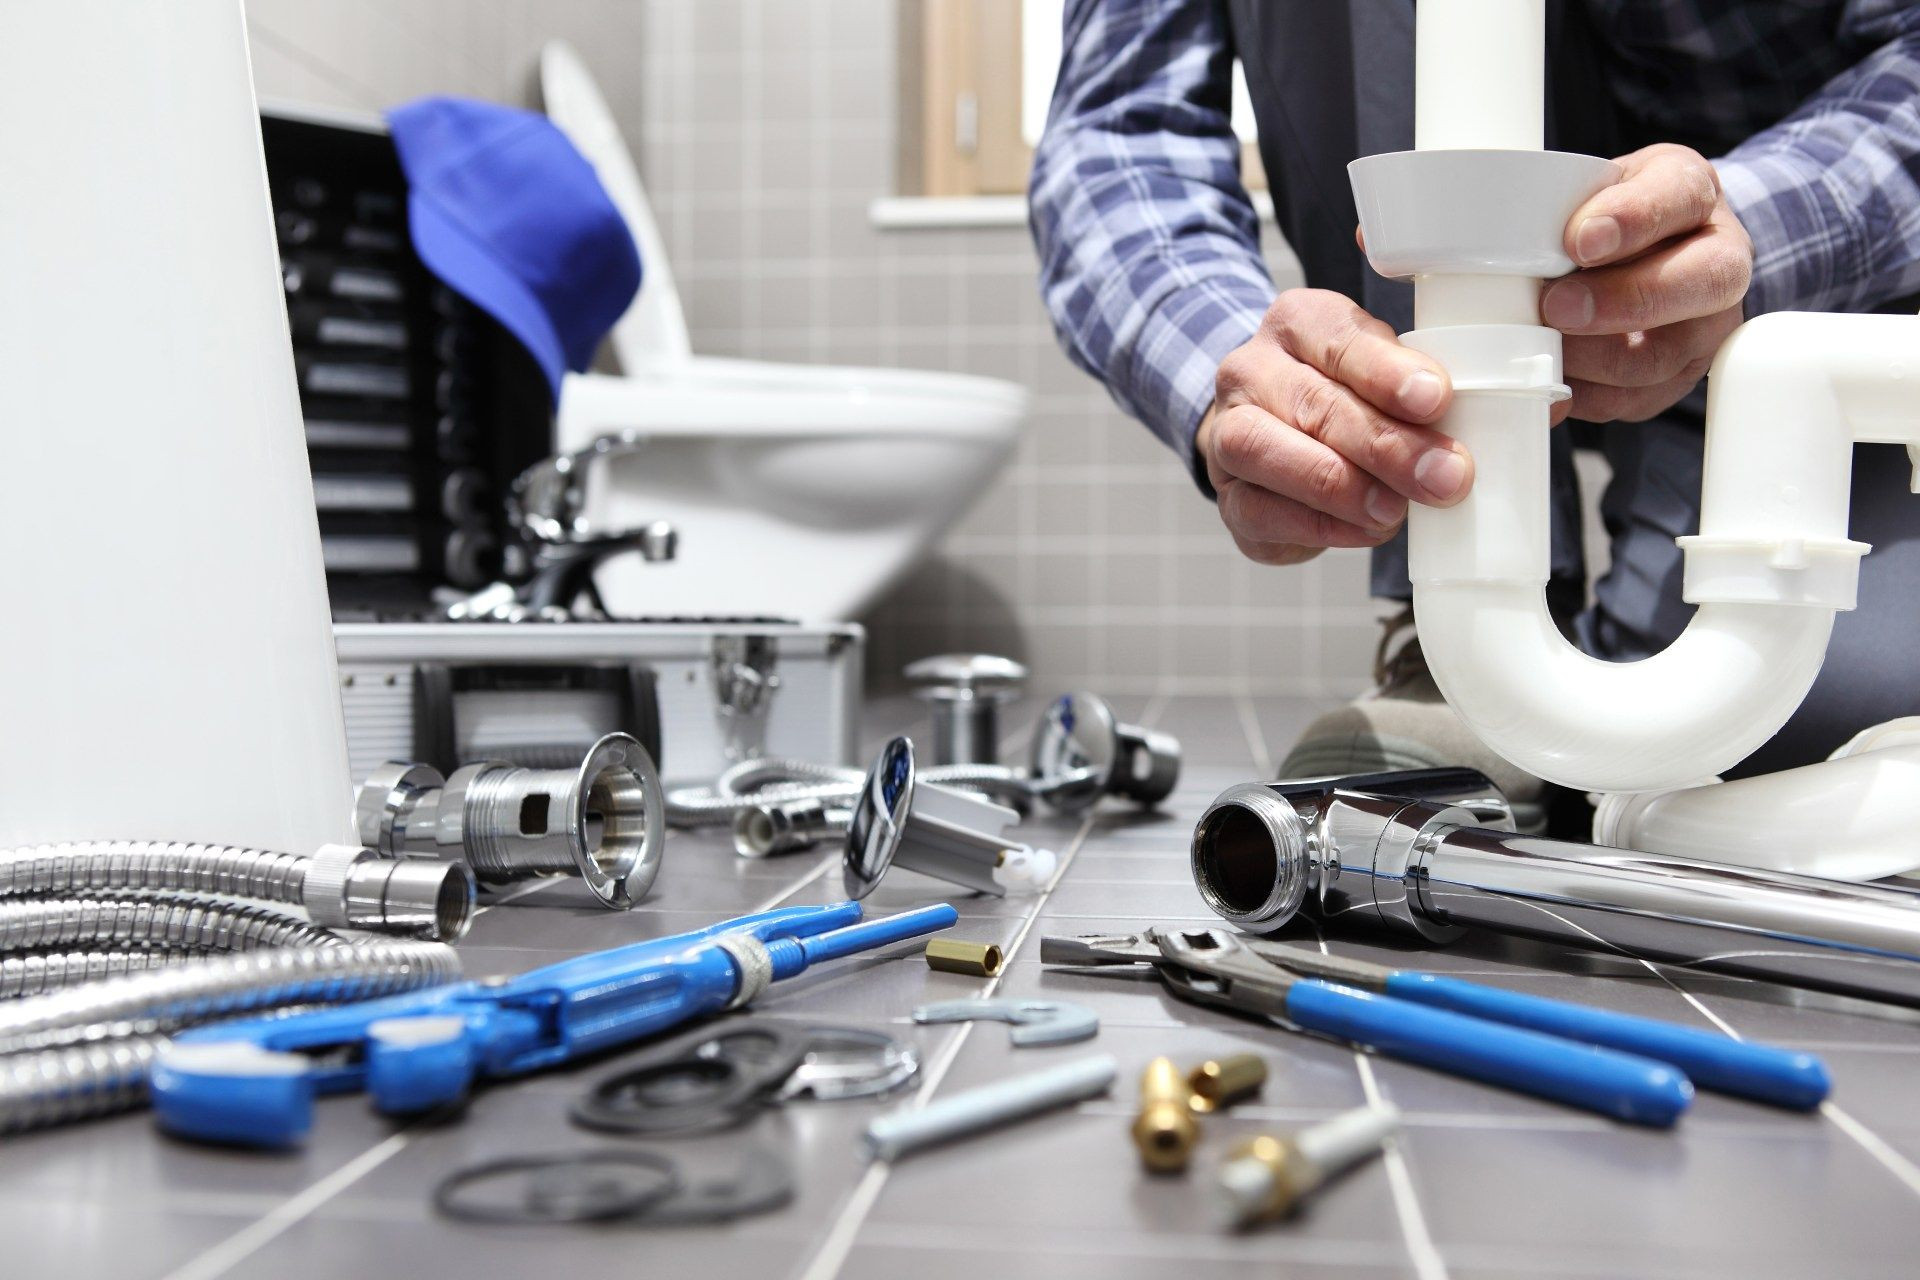 Montreal plumbing services company / Plumbing and plumber service for kitchen and bathroom in Montreal, Westmount, Outremont, Rosemont, Kirkland, Dorval, Verdun, Lasalle, ... and surrounding areas 